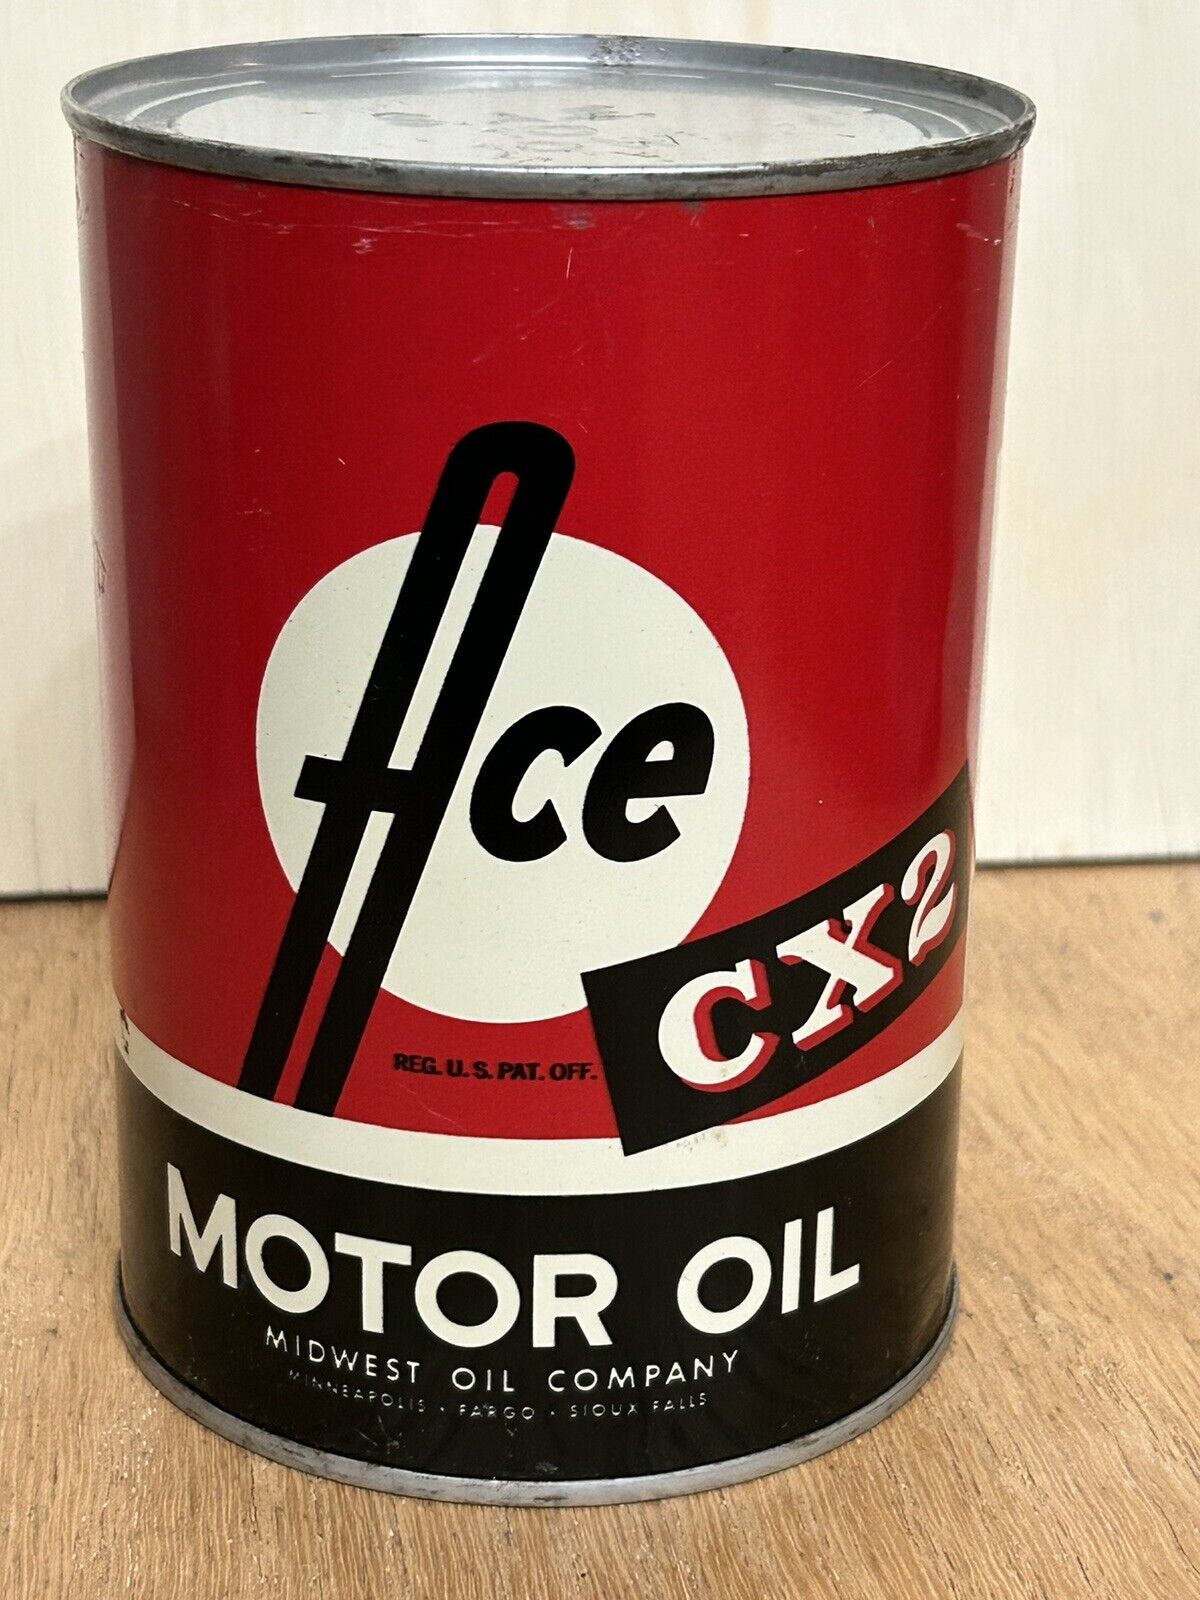 NOS Ace CX2 Motor Oil One Quart Metal Oil Can -FULL- Beautiful Glossy Paint